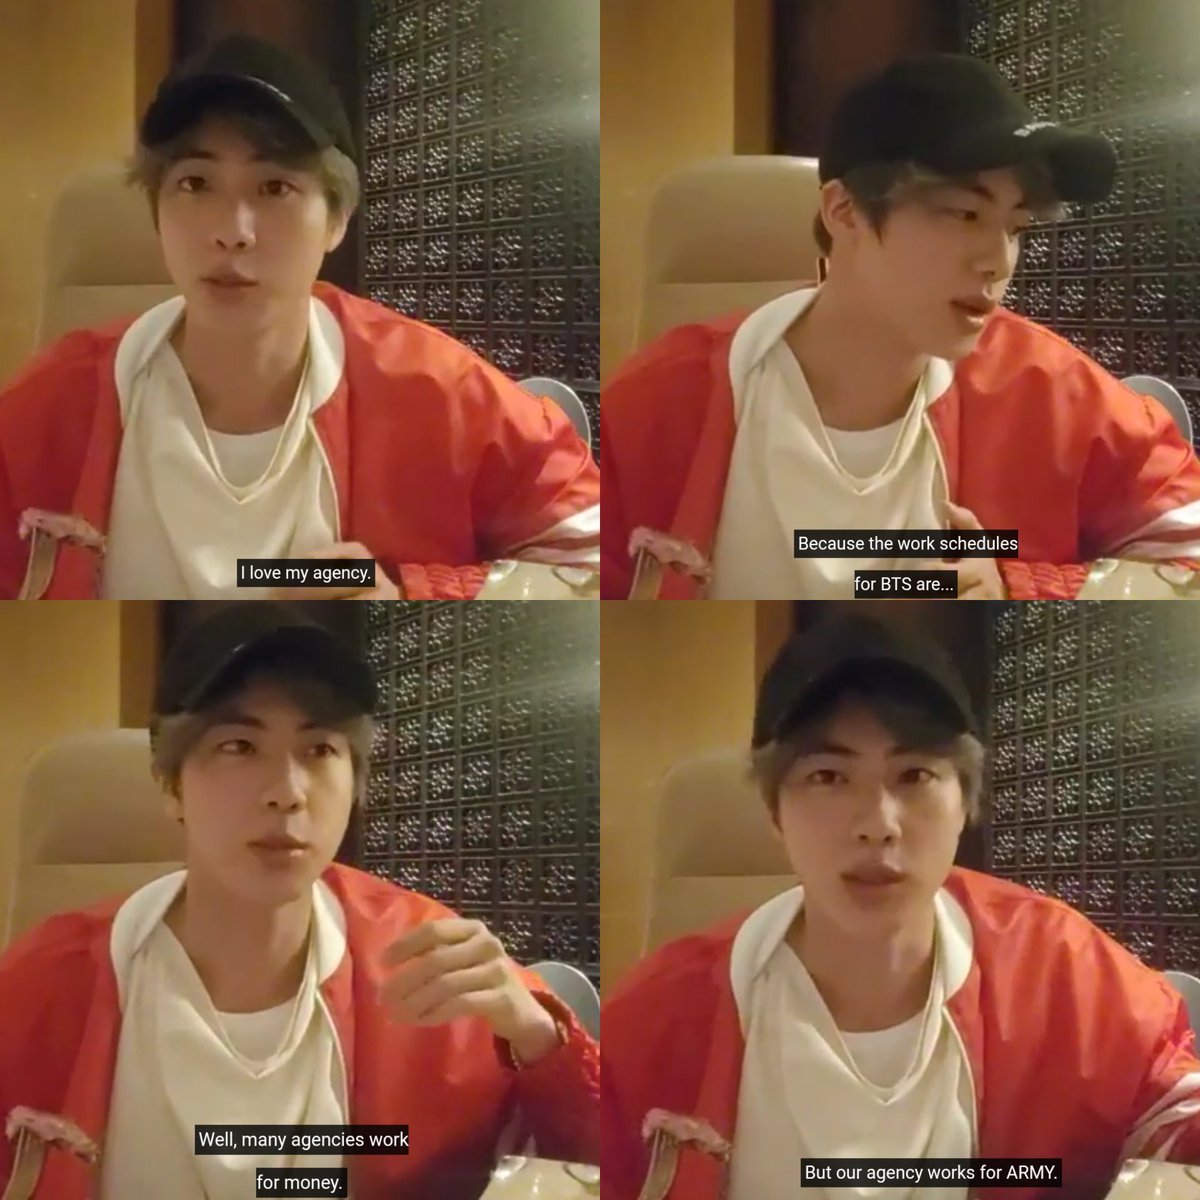 Let's start with seokjin saying this on one of his vlives. He really said other companies works for money (he knows what's up) and that he's proud of BH for working for armys